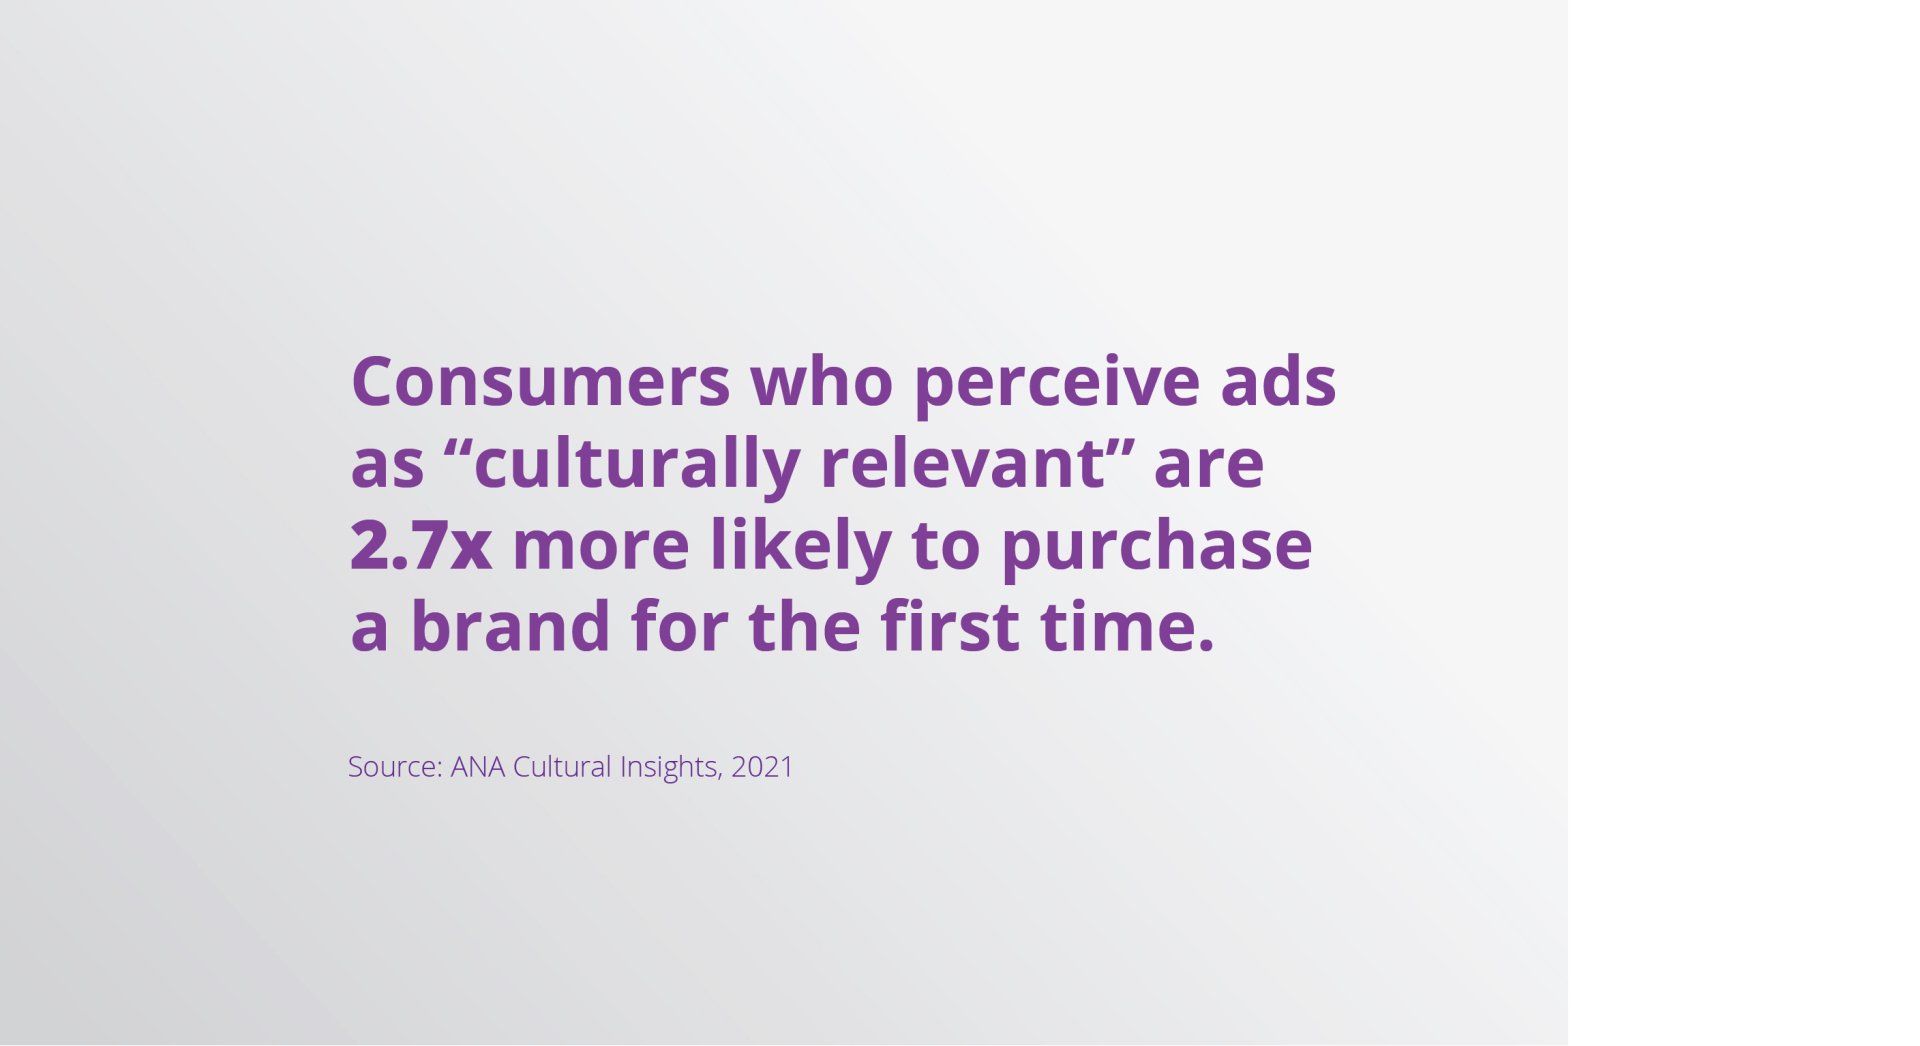 An infographic shows that culturally relevant ads are 2.7x more likely to inspire first time purchases among consumers. For this reason, Hispanic marketing is key!